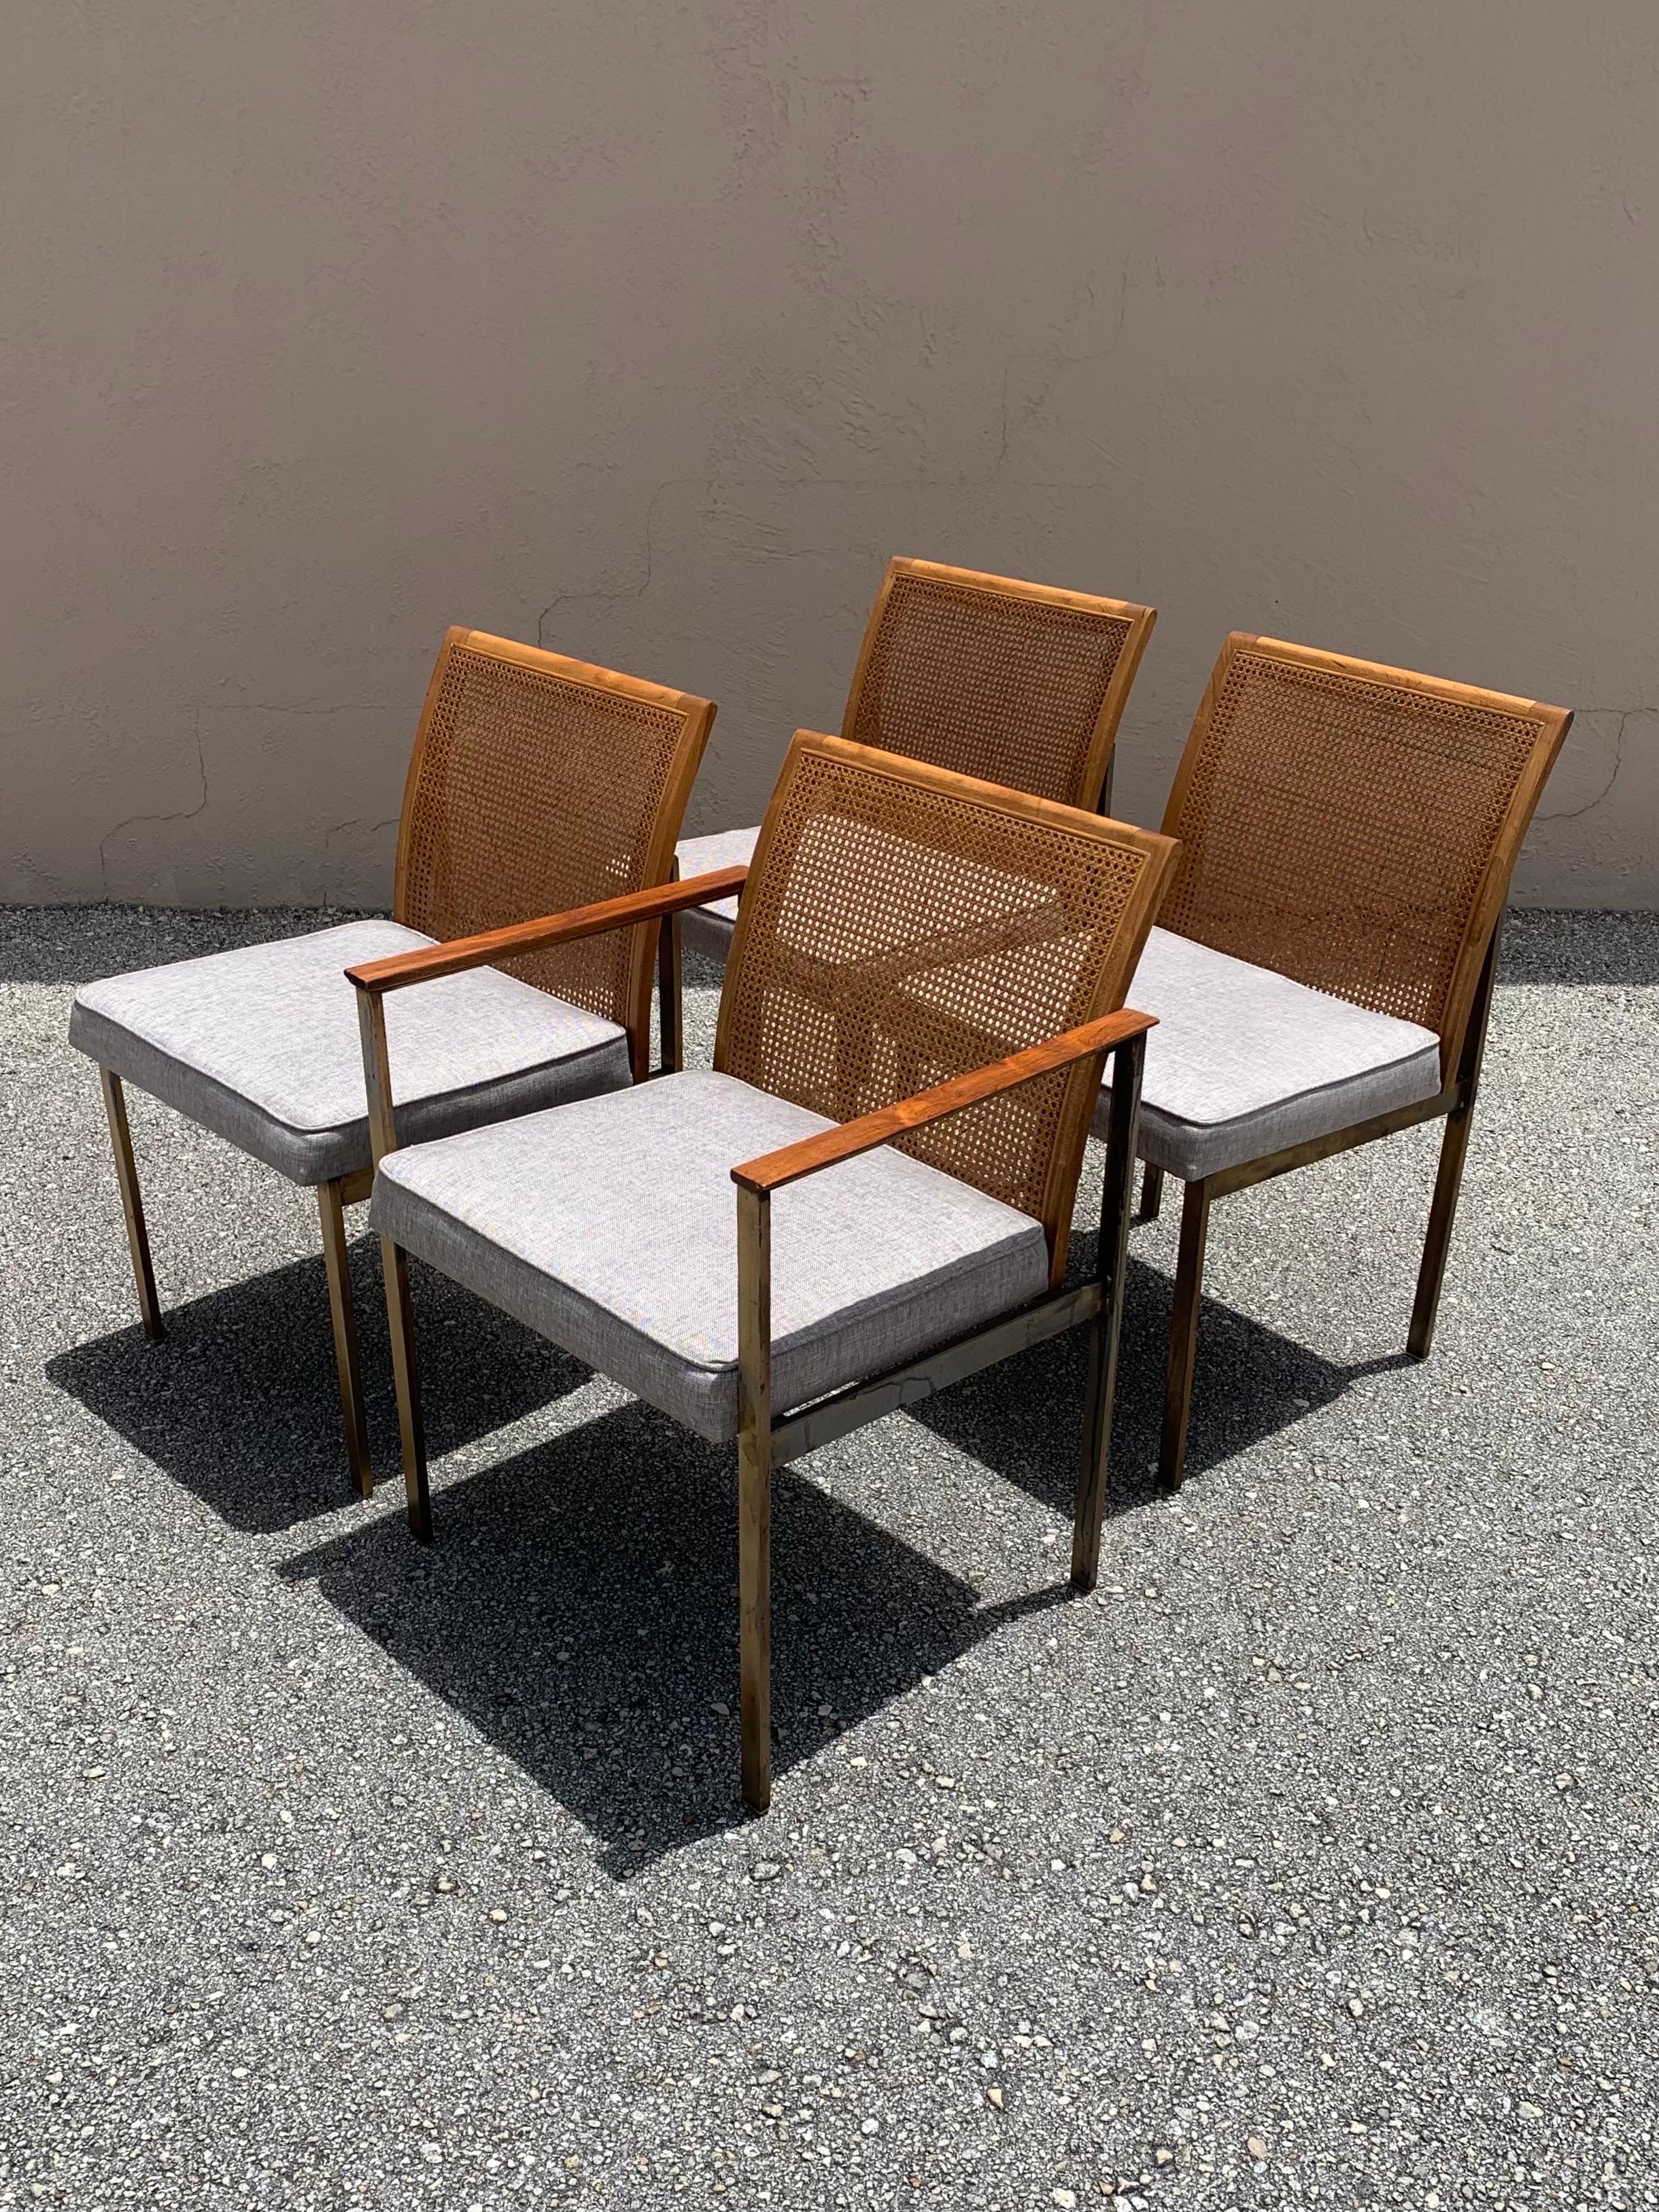 Set of 4 unique dining chairs made by Lane Furniture. Often attributed to Paul McCobb due to the simple yet elegant design. Clean lines through the metal frames working up to the wood and cane backrests. 4 total chairs. One captain chair and 3 side